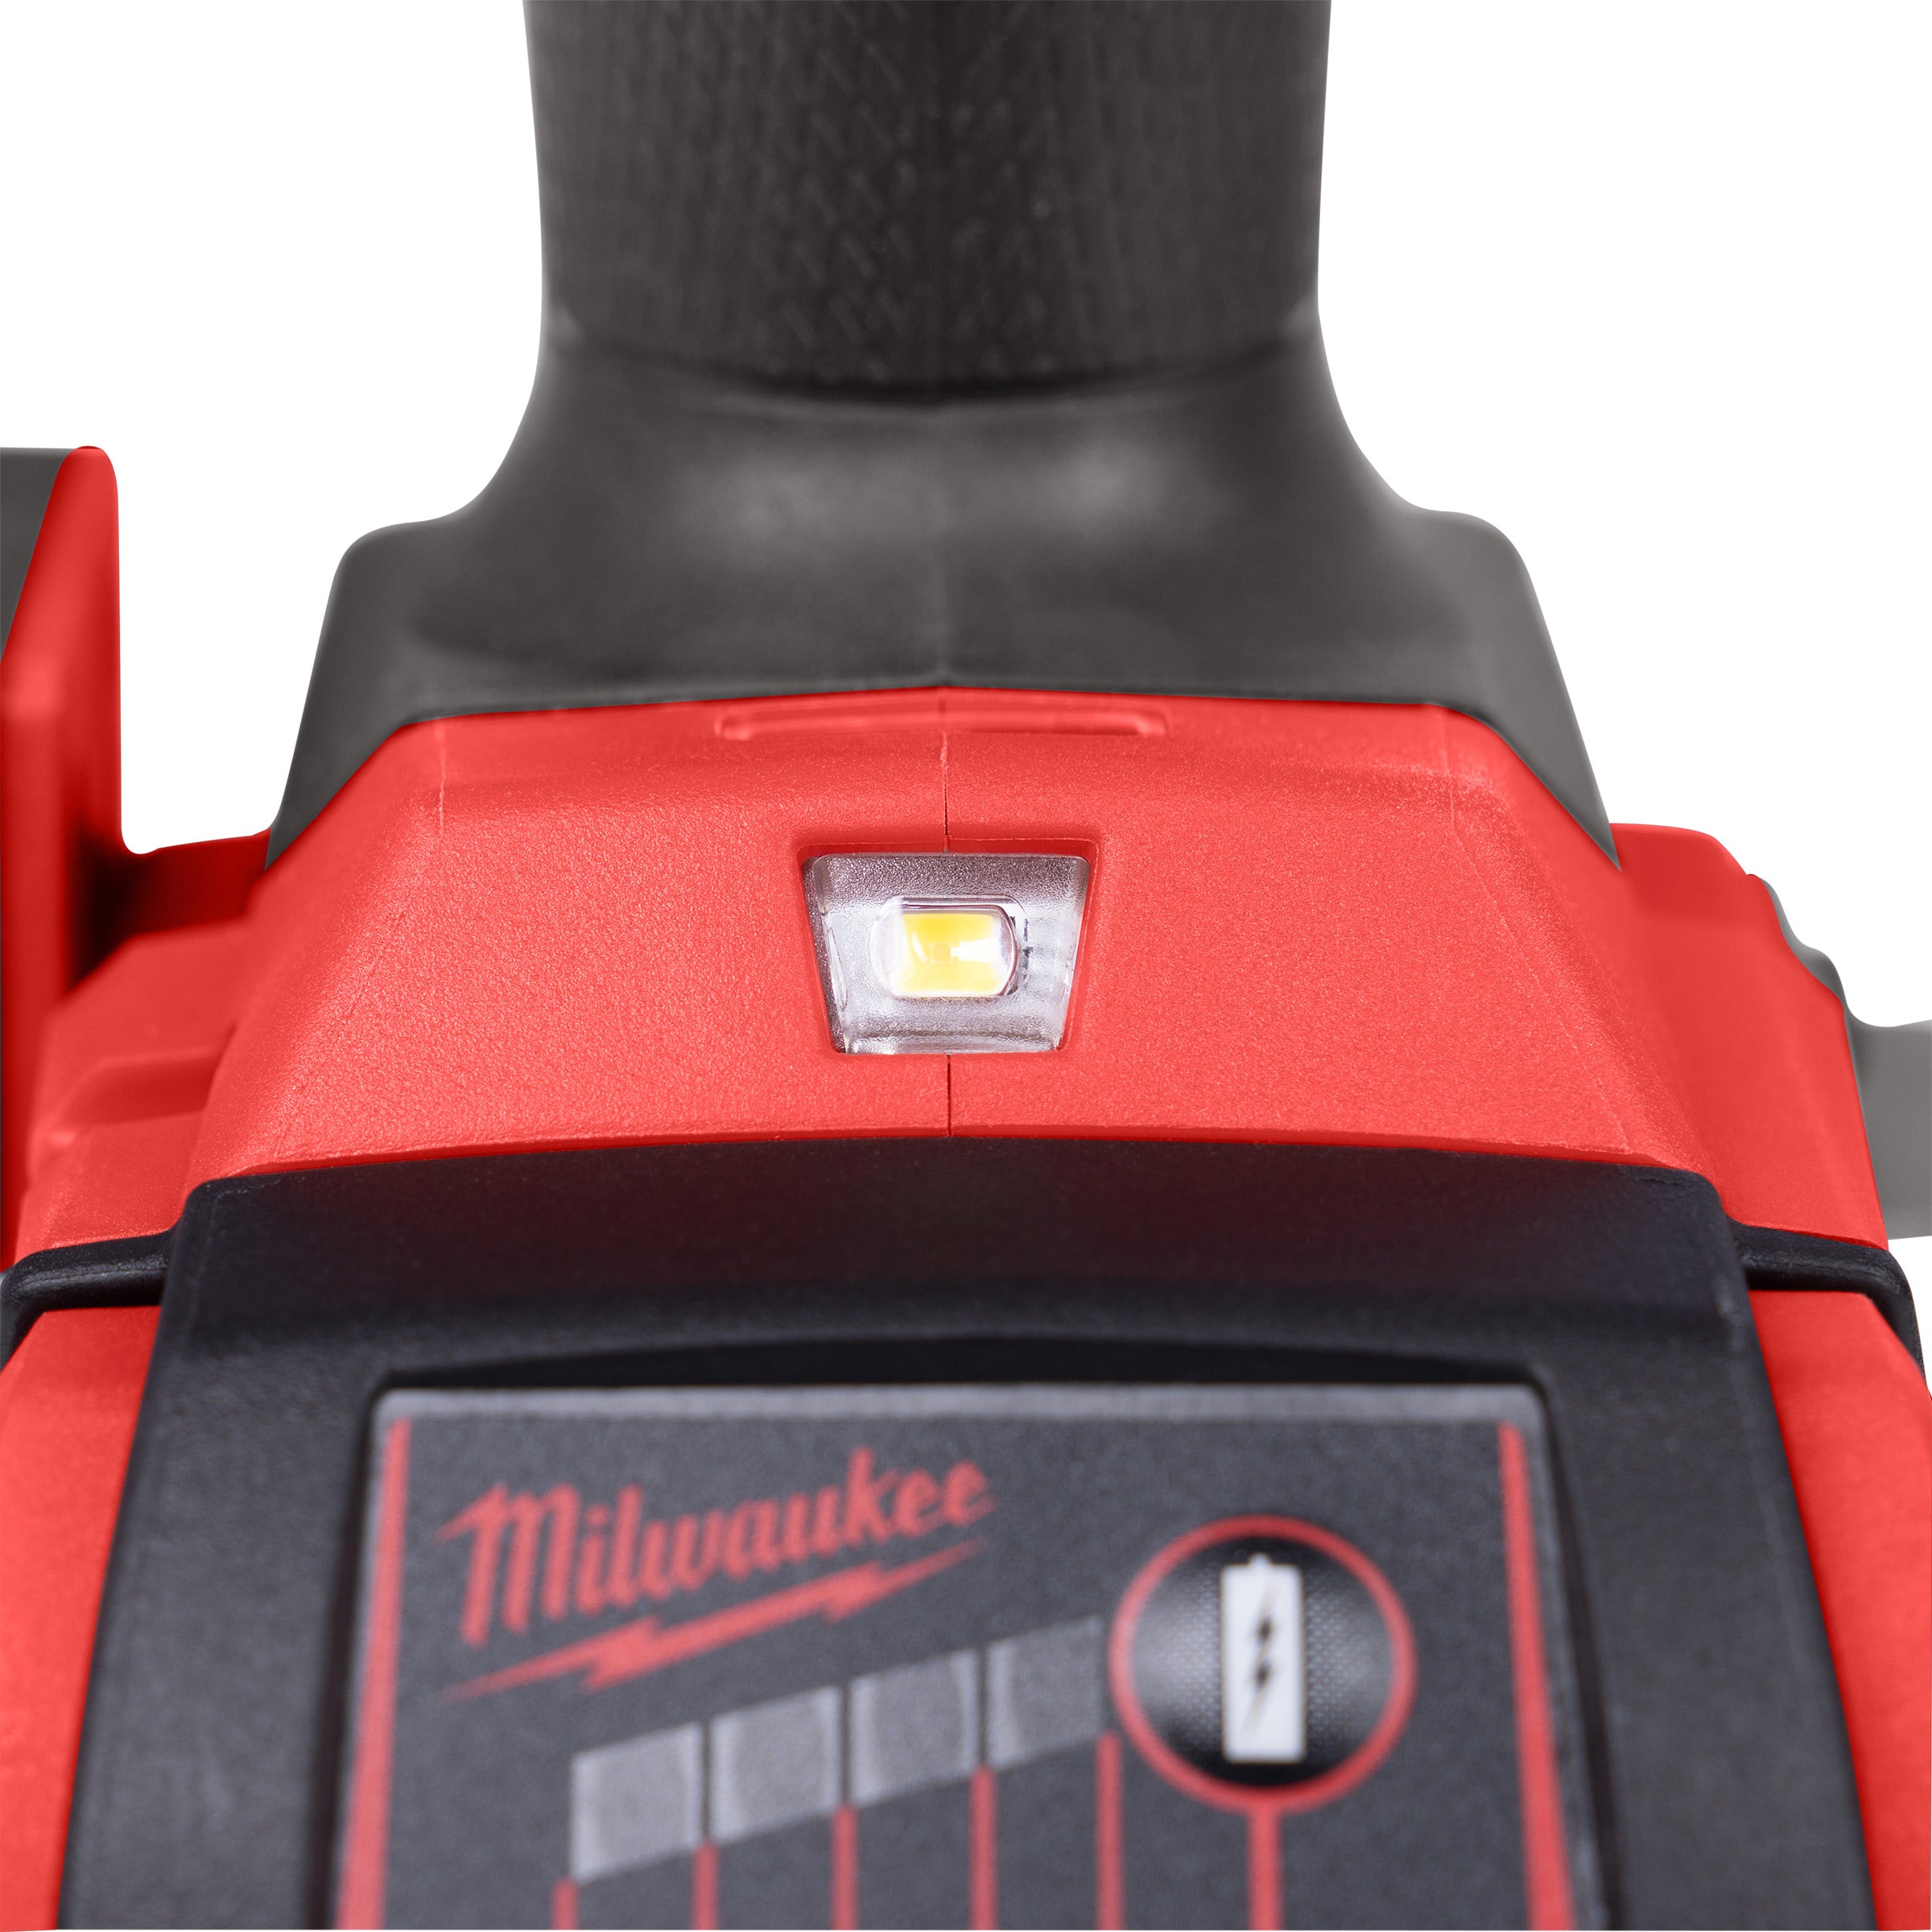 Milwaukee 18V Brushless Twin Pack Impact Driver + Combi Drill with 2 x 5.0Ah Battery T4TKIT-16181